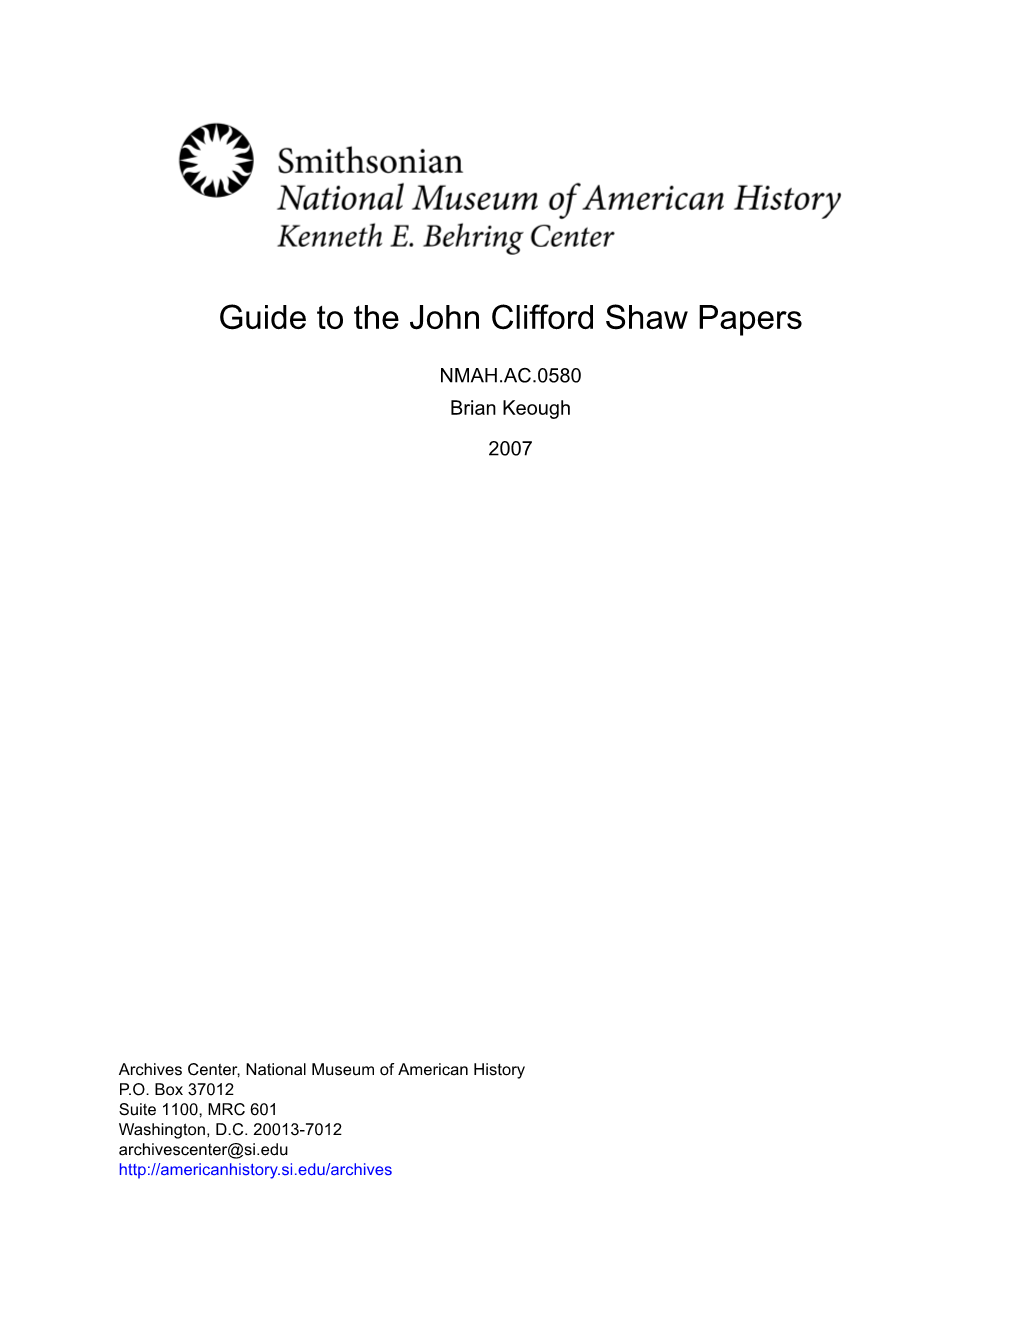 Guide to the John Clifford Shaw Papers